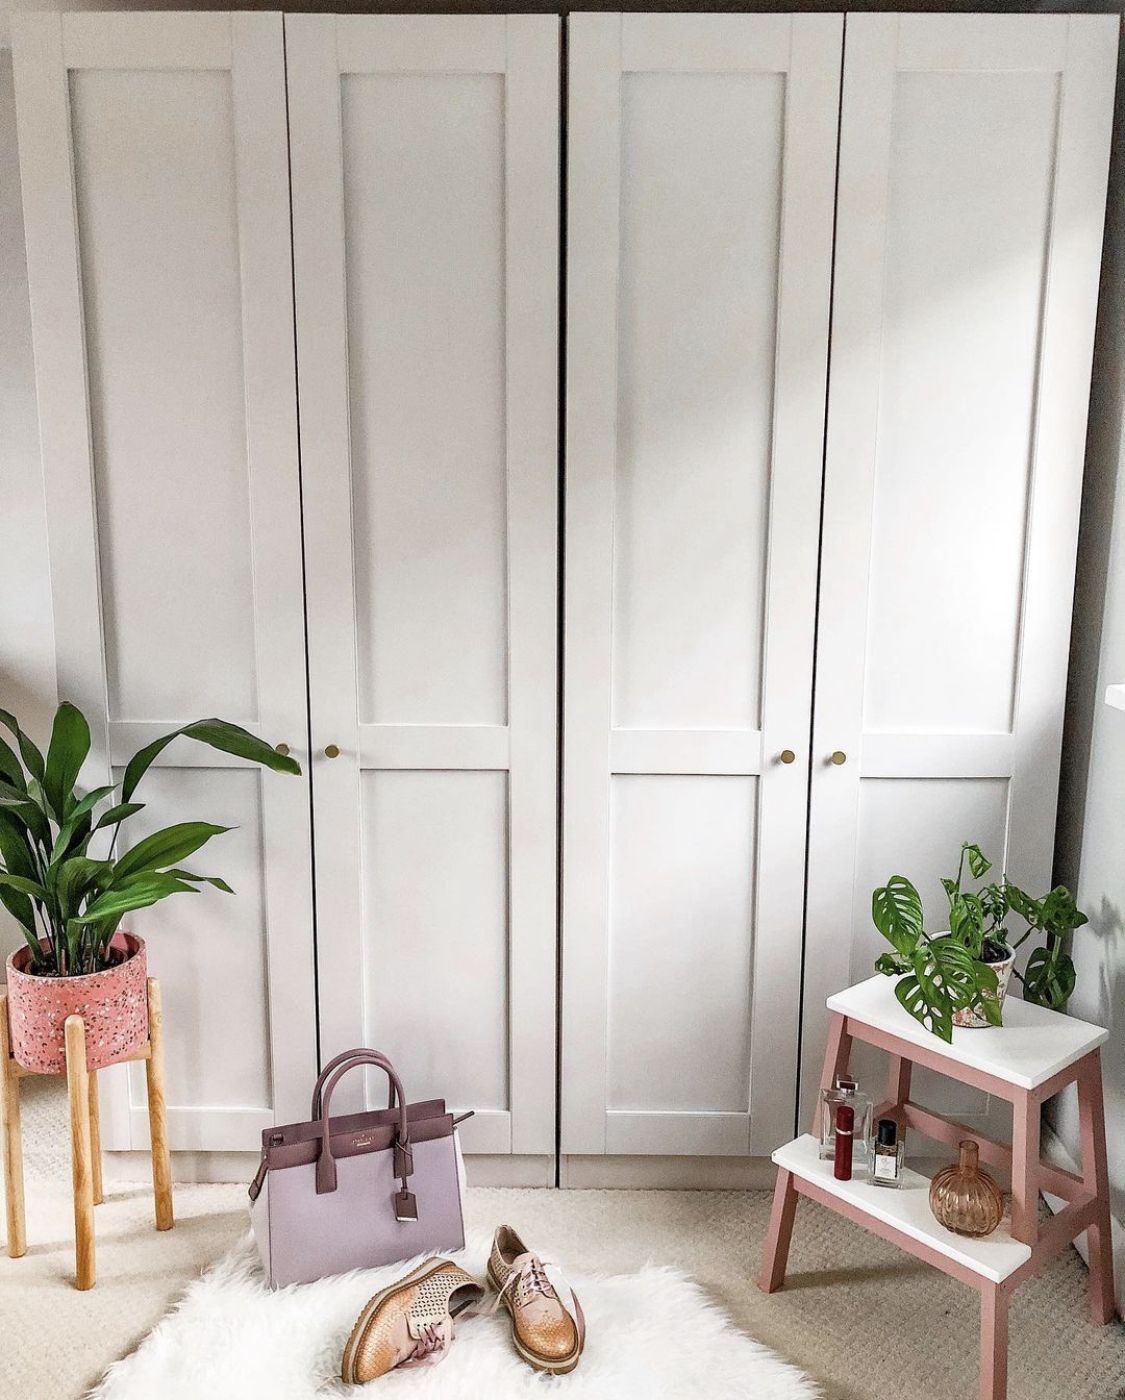 Our Budget Wardrobe Makeover For Under £35! – Boo & Maddie Inside Farrow And Ball Painted Wardrobes (View 13 of 20)